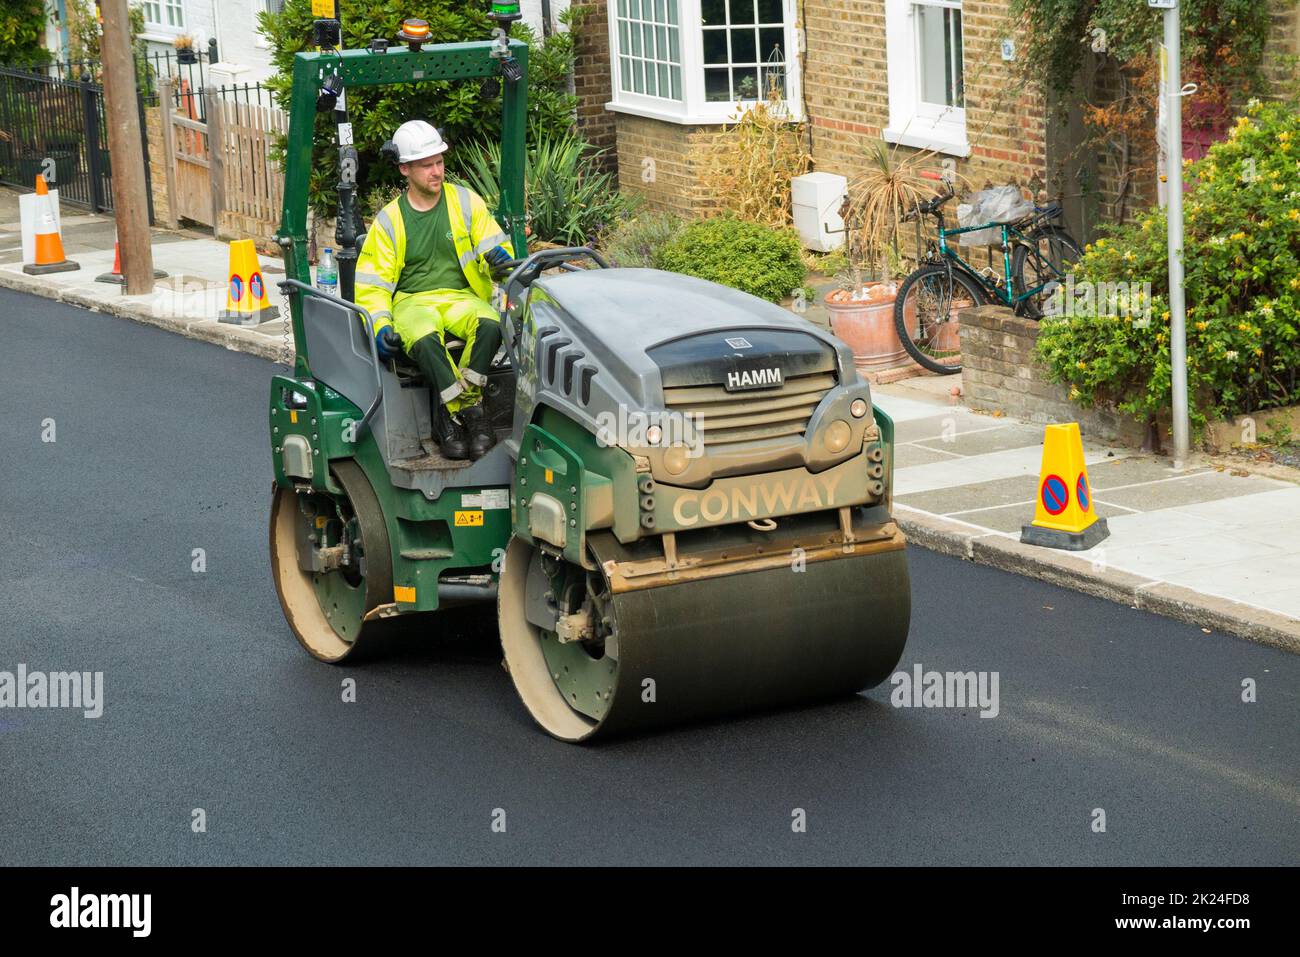 Road roller smoothing hot tarmac that has been laid while resurfacing a residential Street in Twickenham, Greater London, UK. The previous worn and potholed surface has been removed. (132) Stock Photo